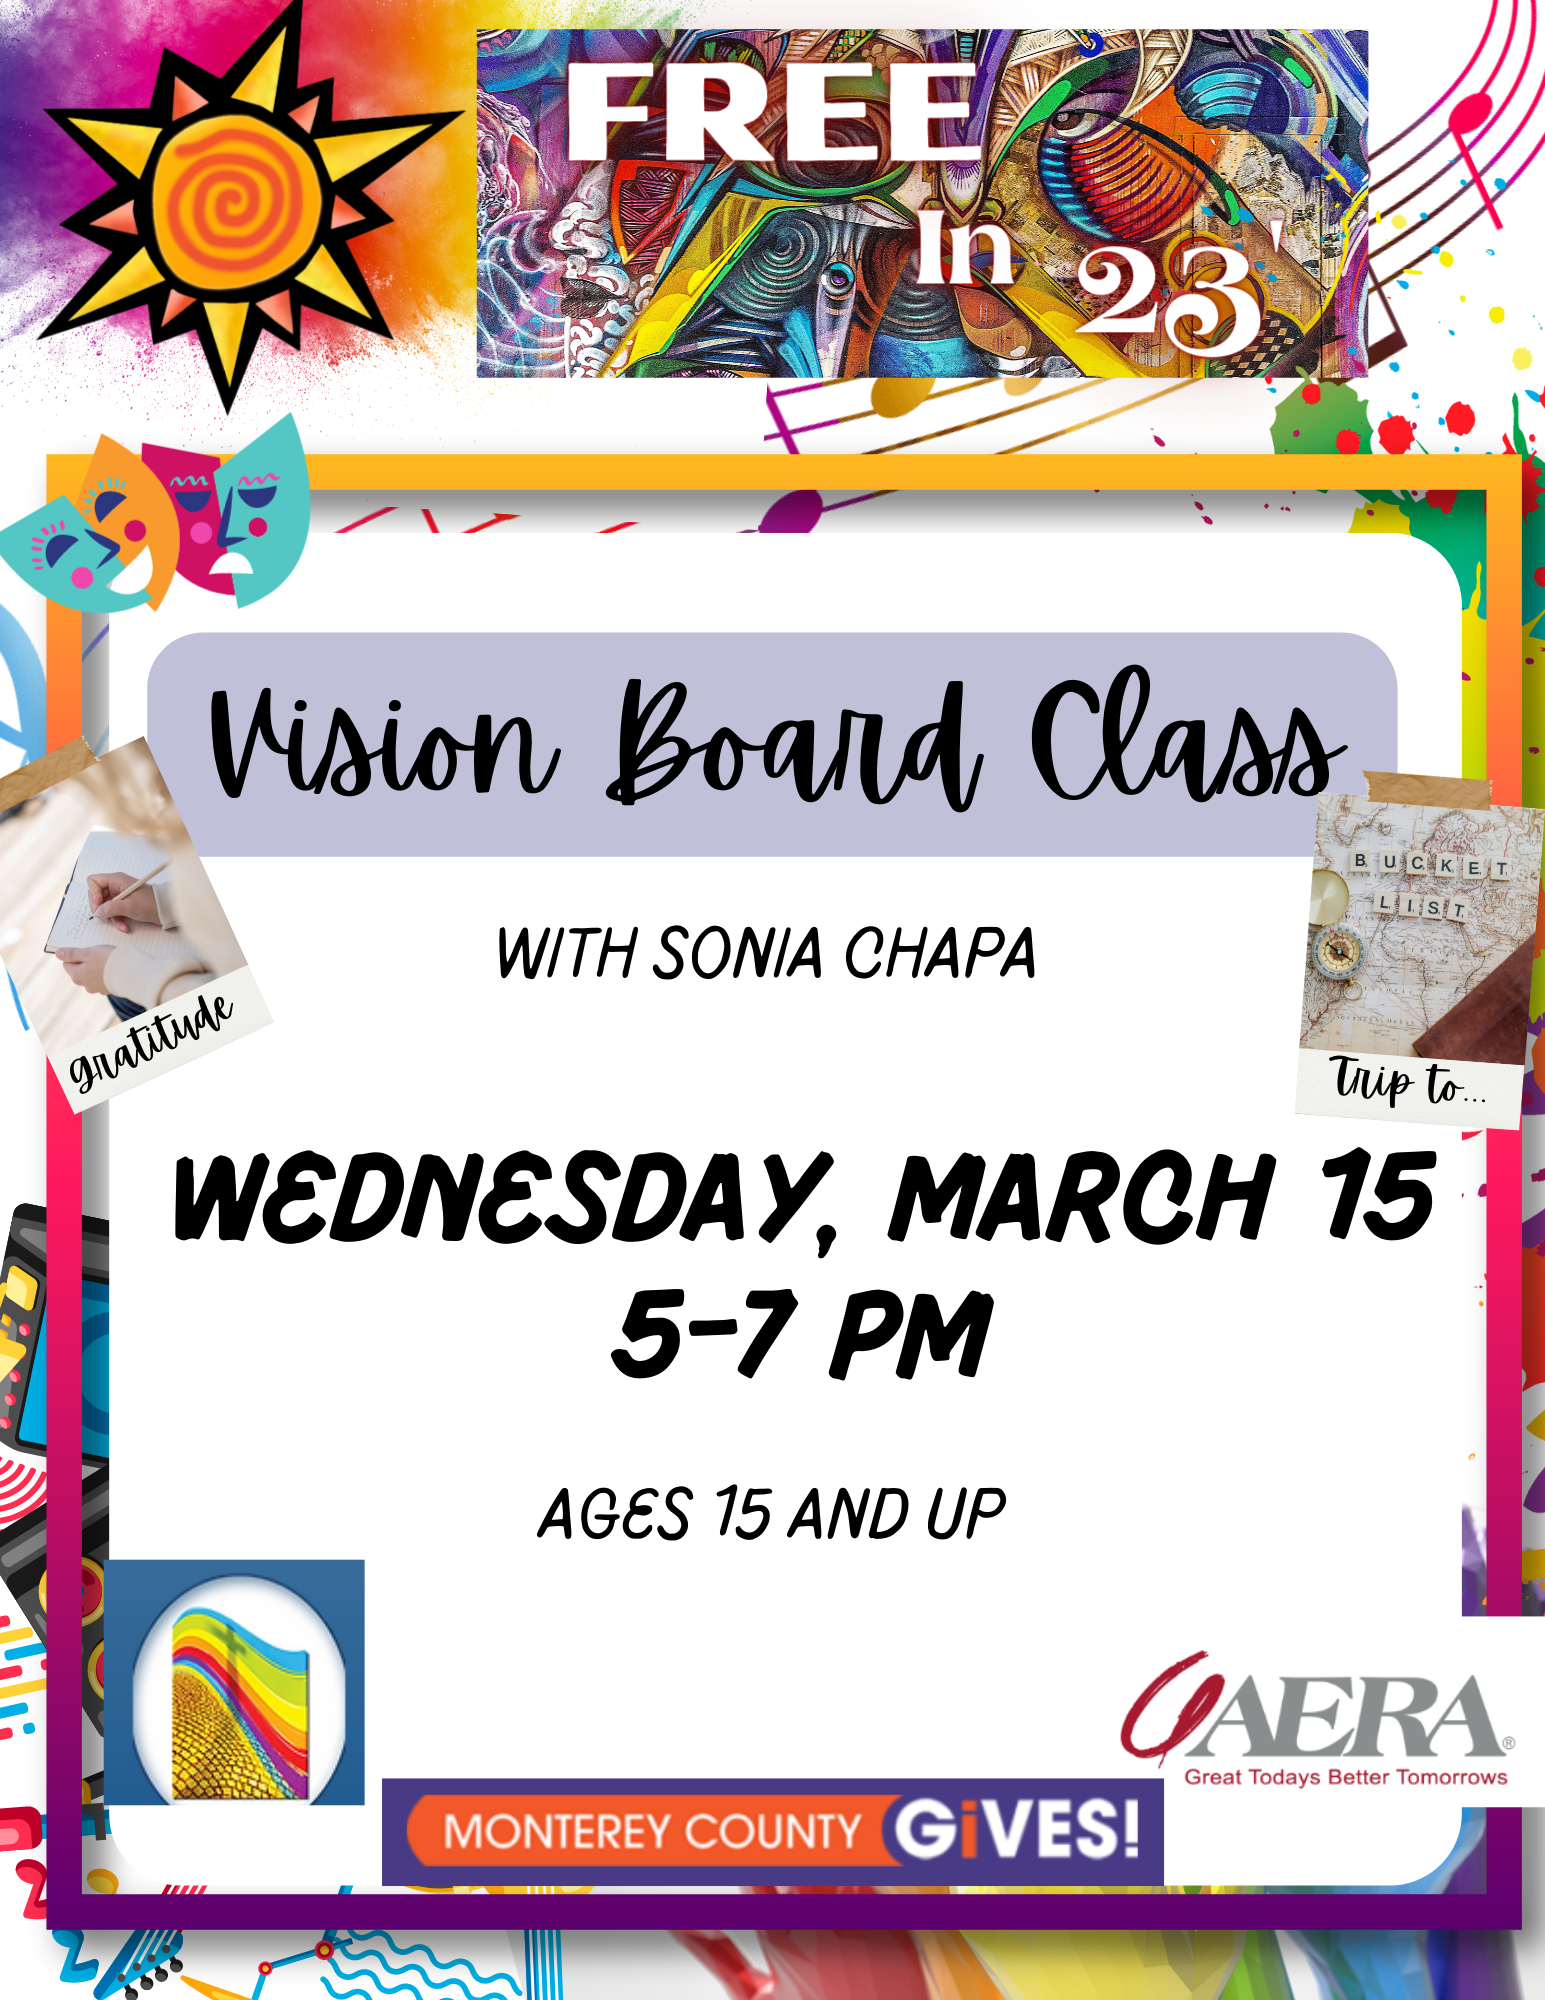 Vision Board Class Flyer Eng